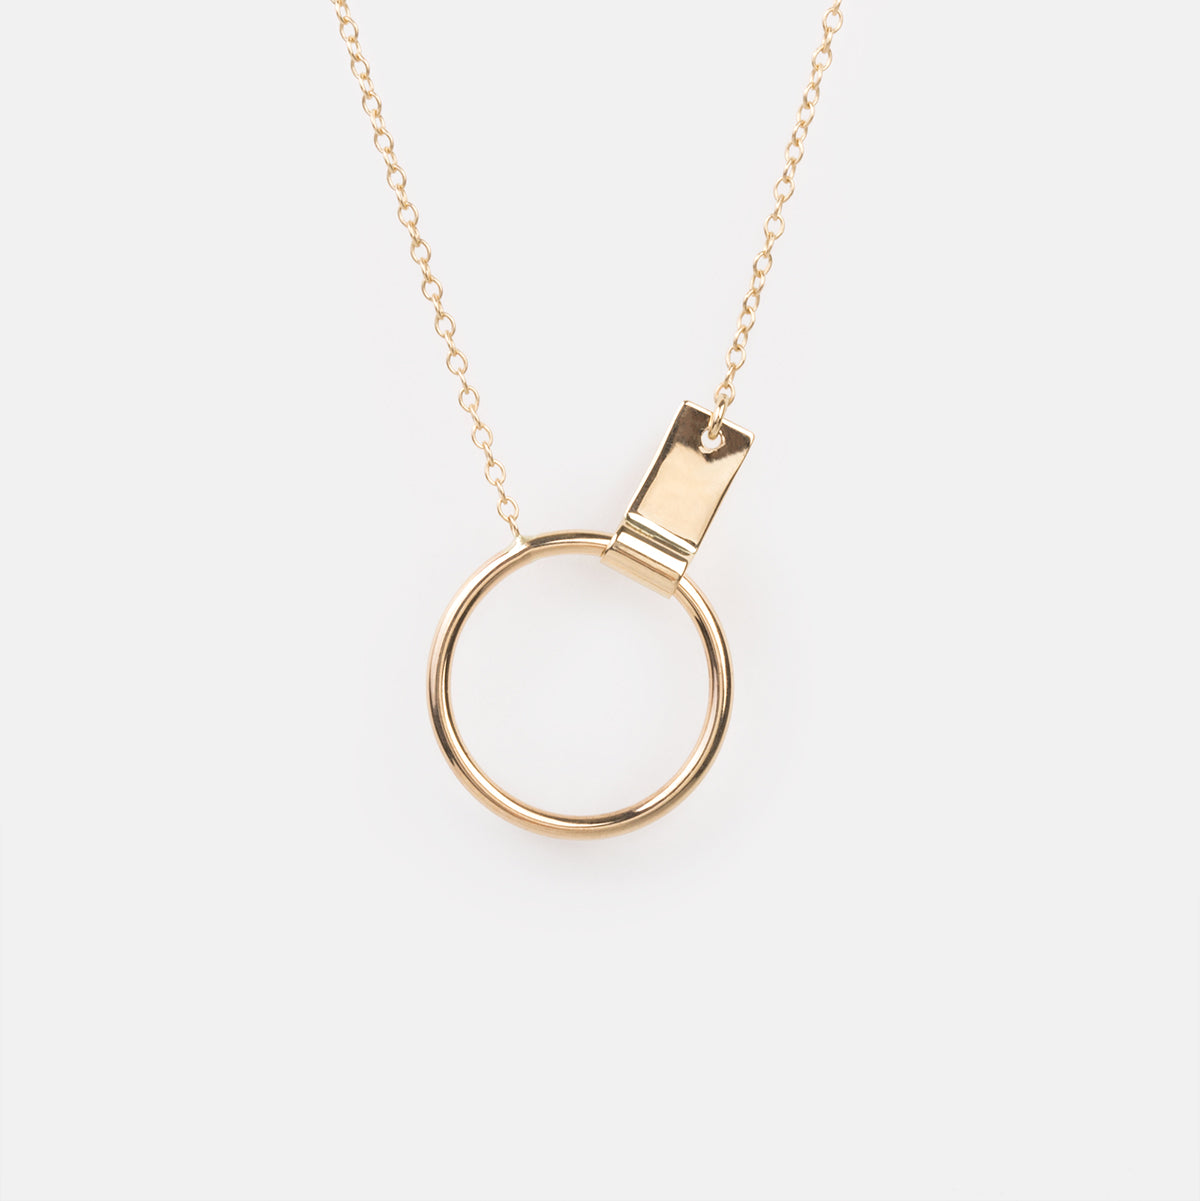 Vasara Unisex Necklace in 14k Gold By SHW Fine Jewelry NYC